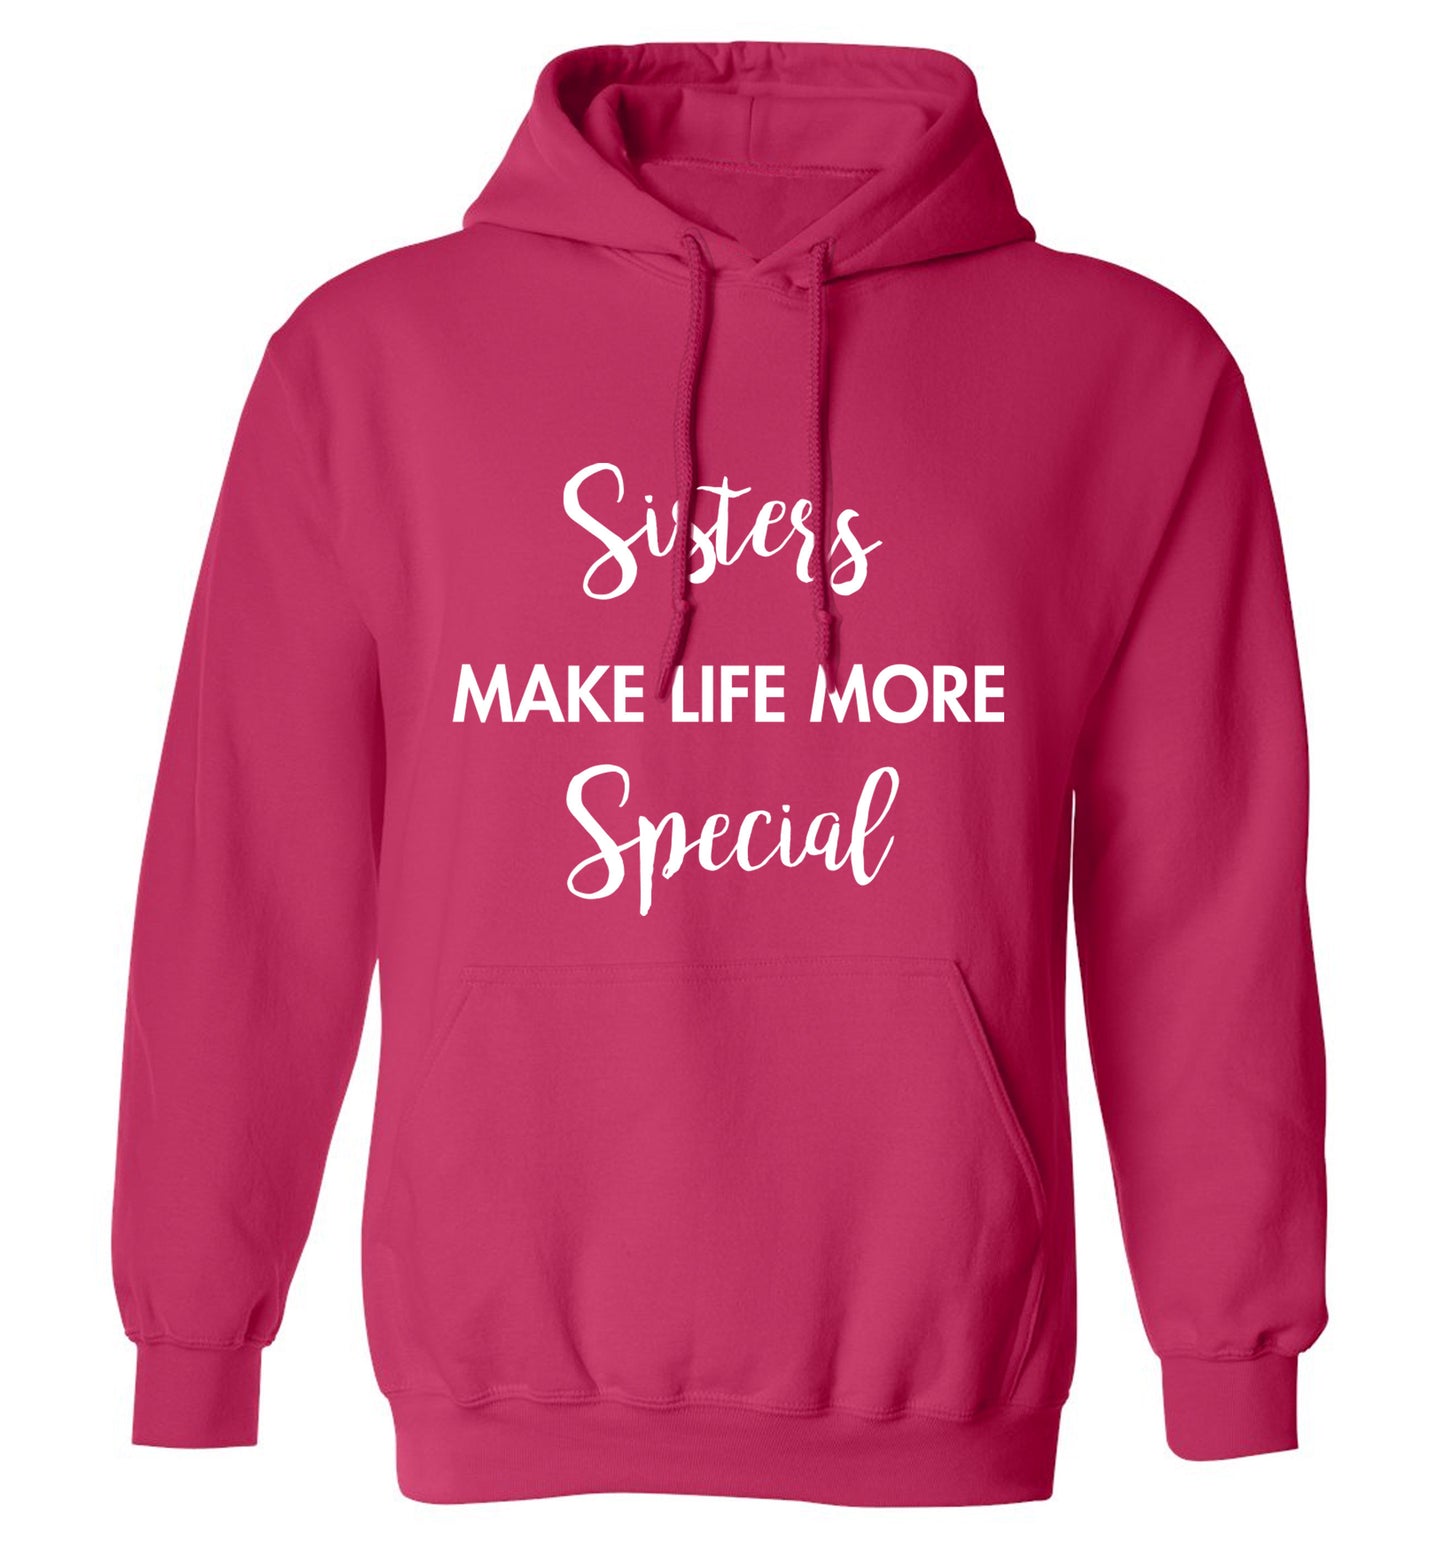 Sisters make life more special adults unisex pink hoodie 2XL